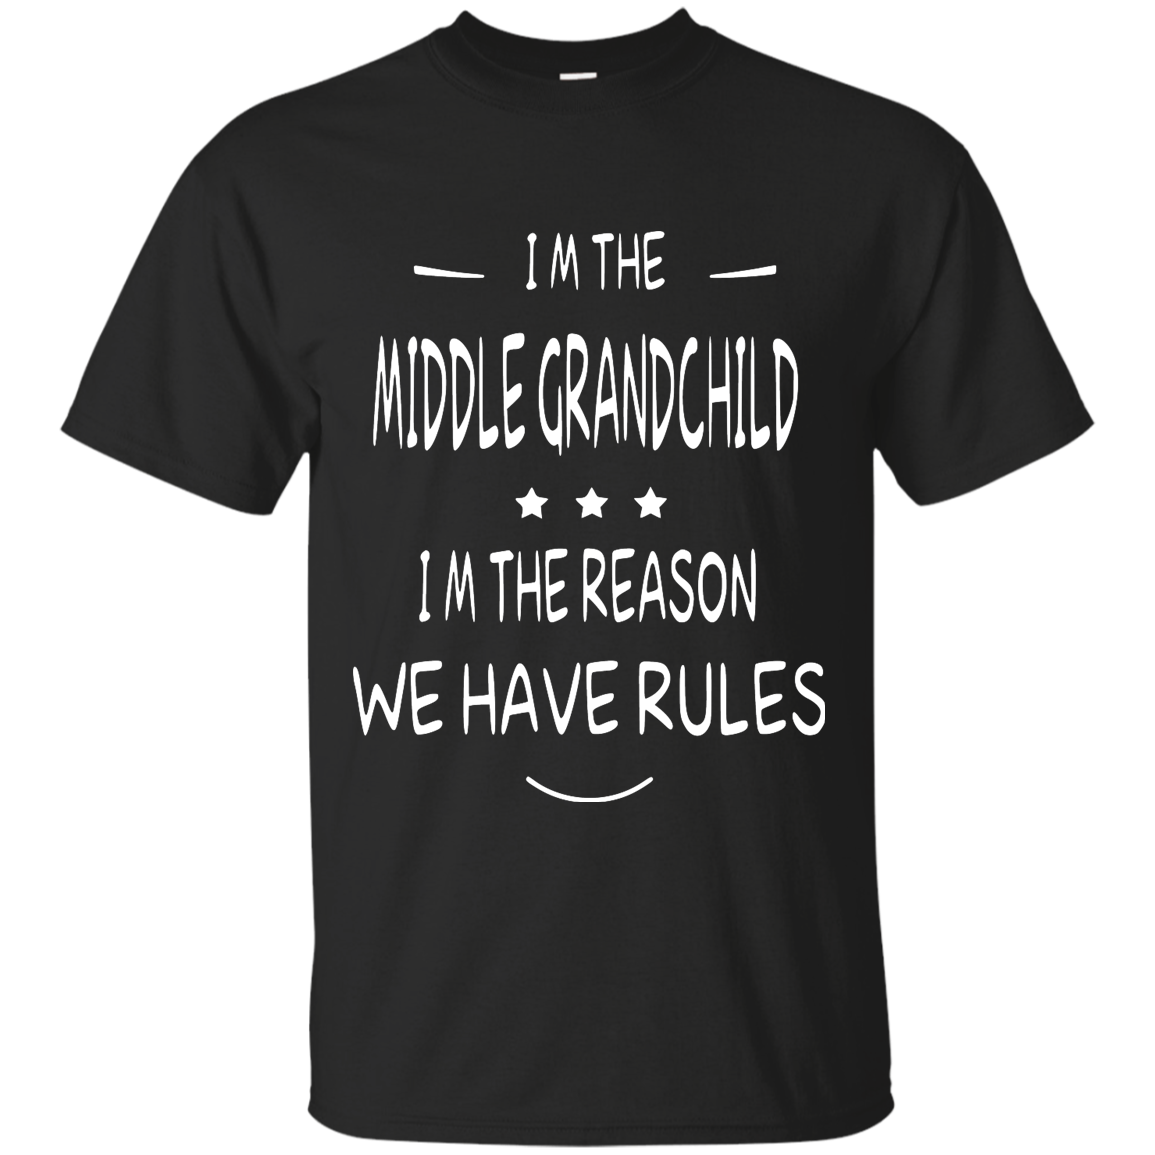 I'm the middle grandchild, I'm the reason we have rules shirt - ifrogtees